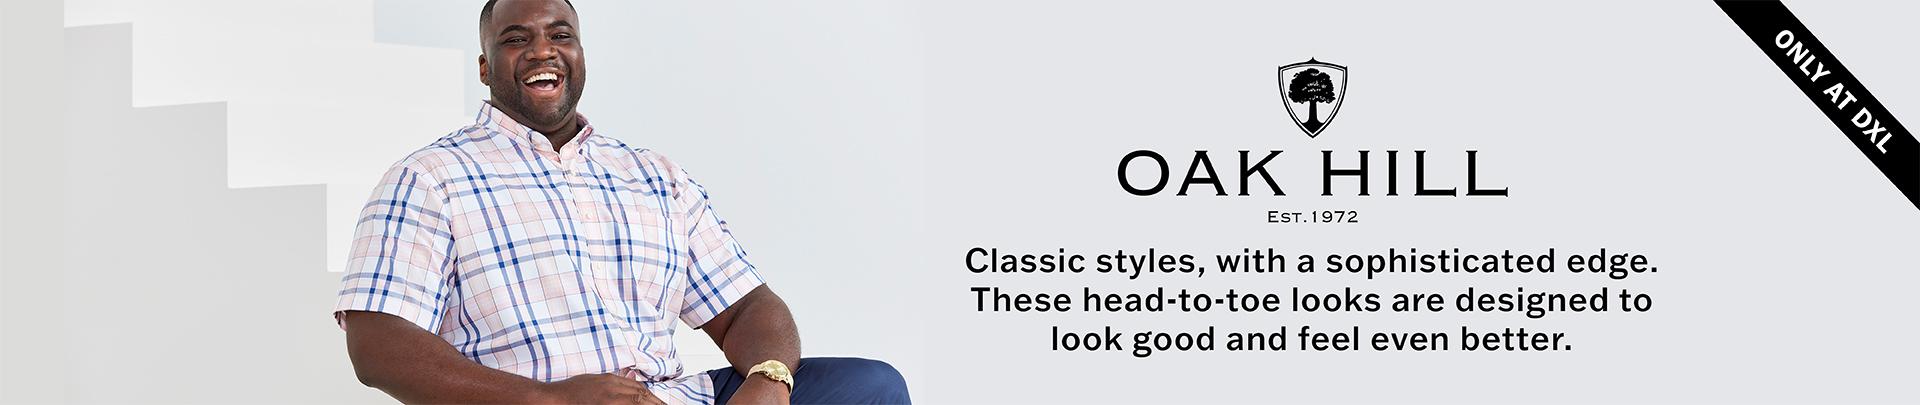 OAK HILL | Classic styles, with a sophisticated edge. These head-to-toe looks are designed to look good and feel even better.